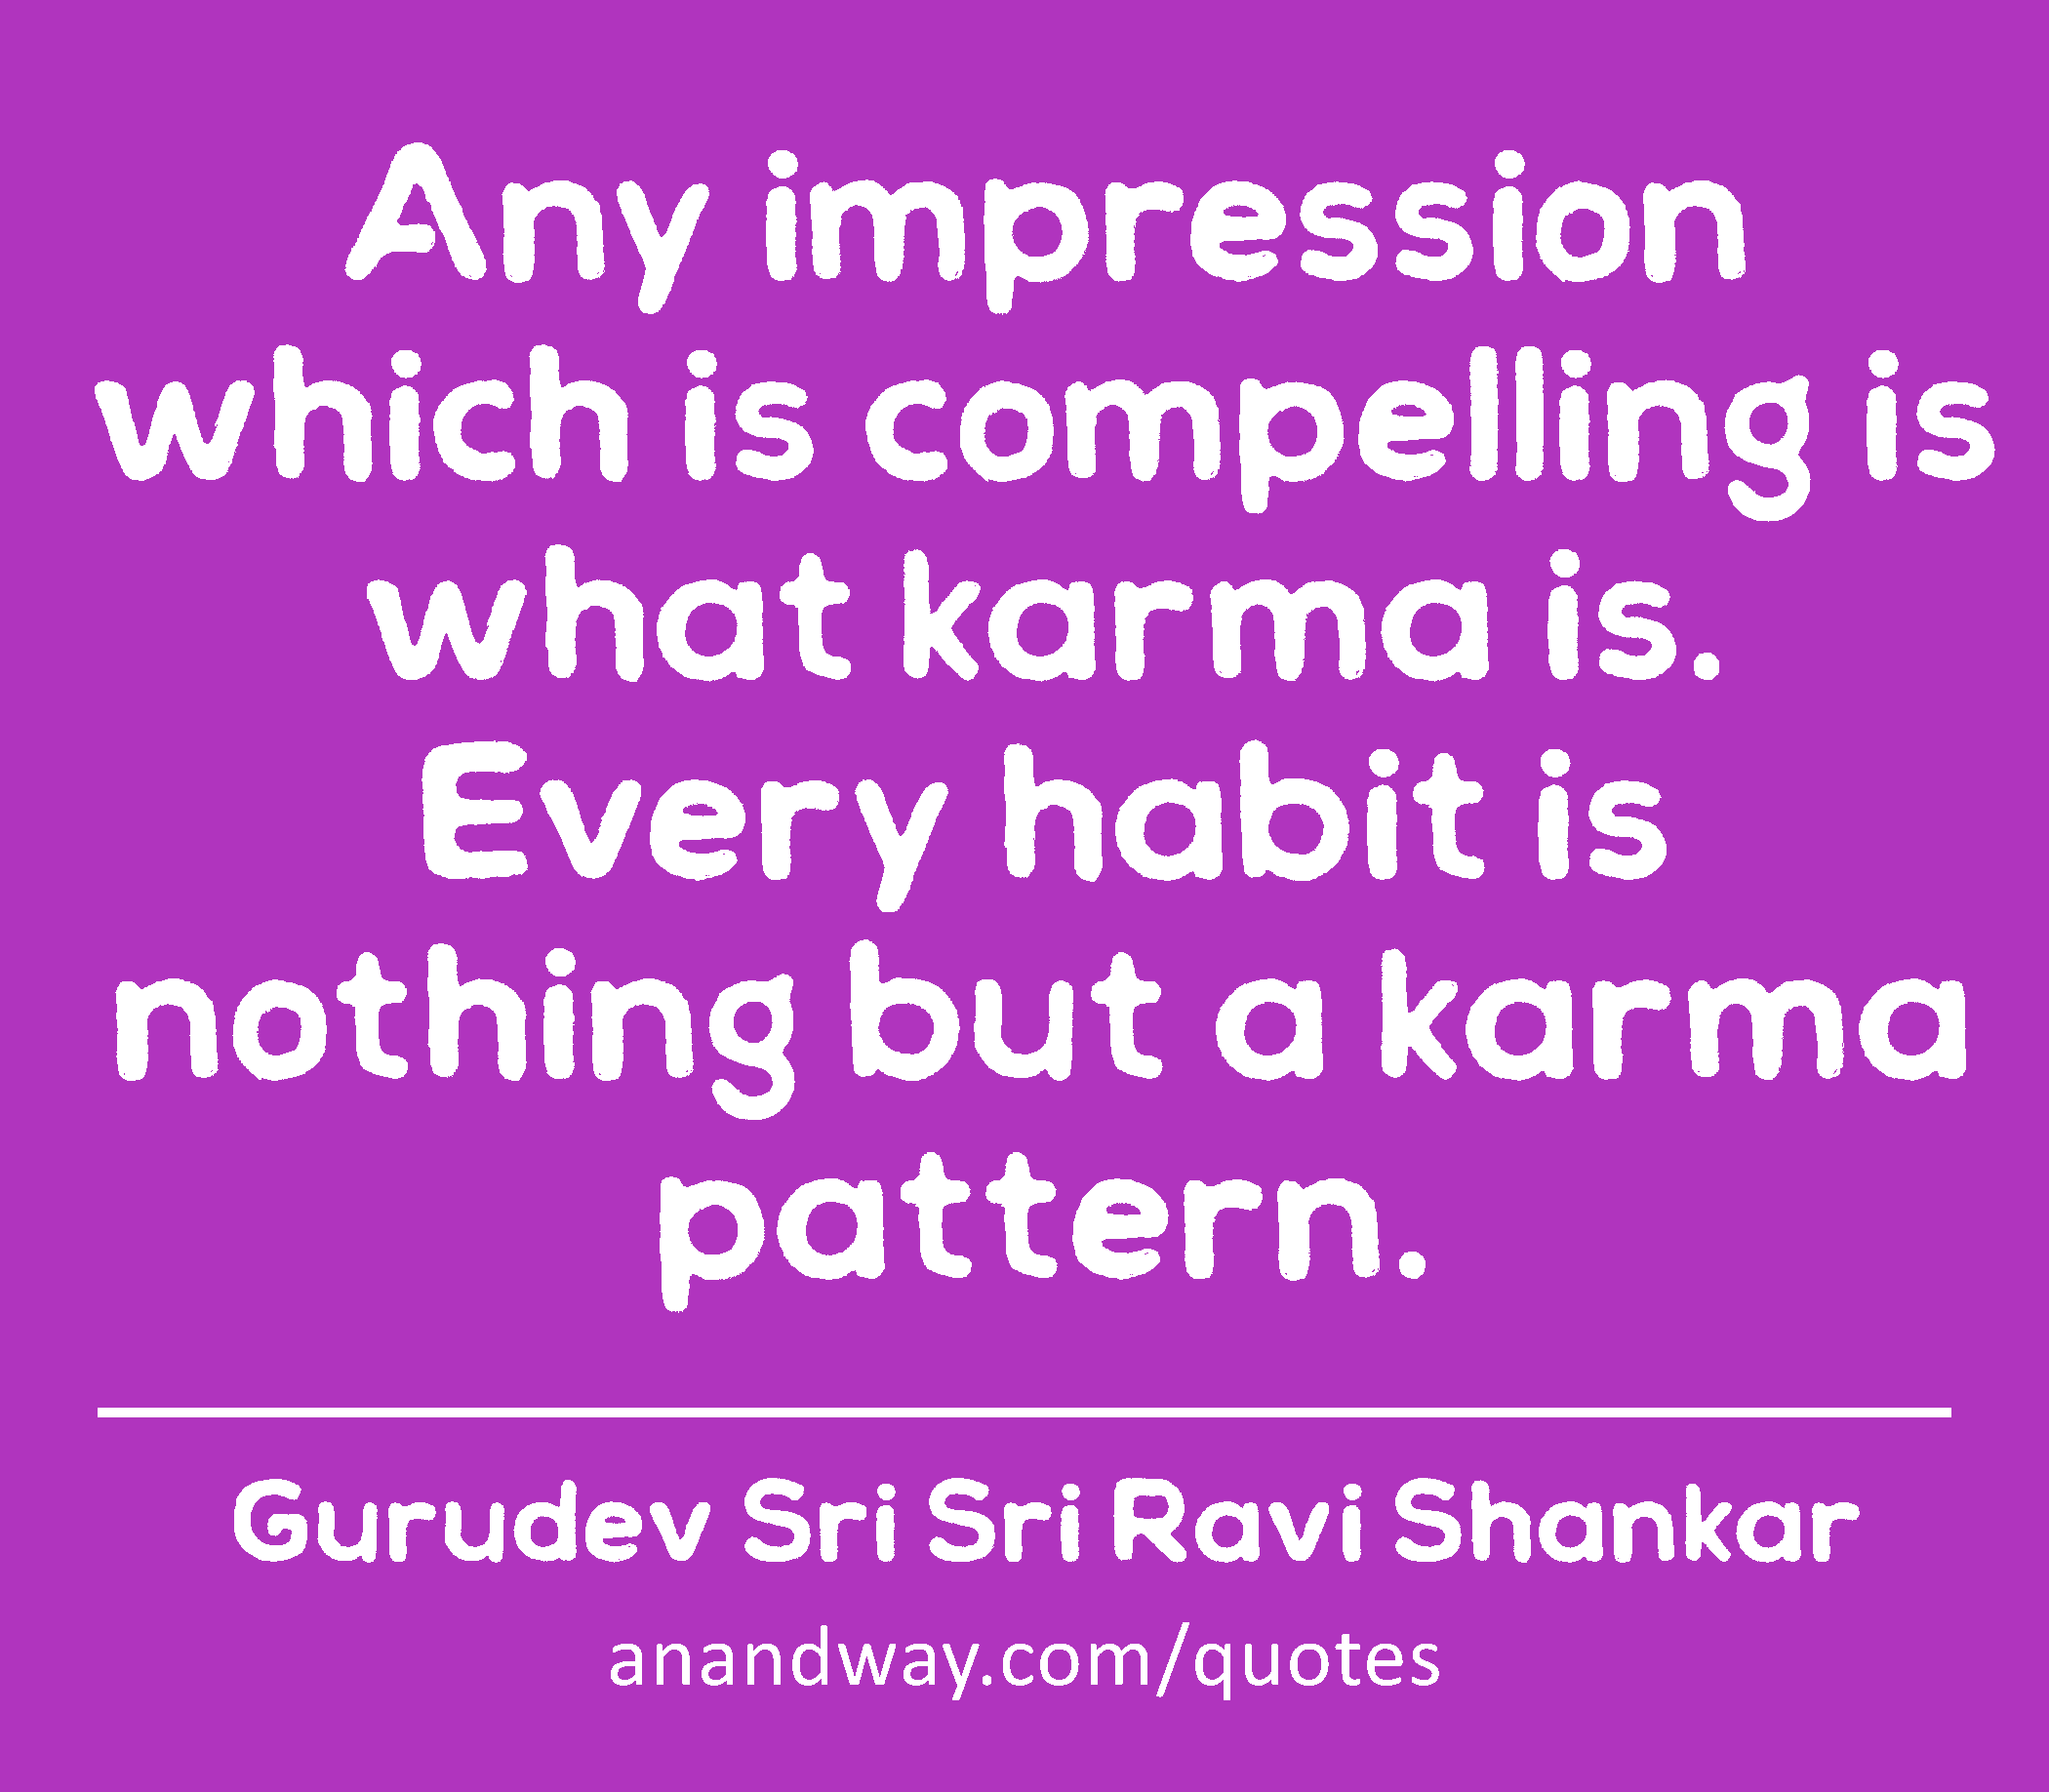 Any impression which is compelling is what karma is. Every habit is nothing but a karma pattern. 
 -Gurudev Sri Sri Ravi Shankar